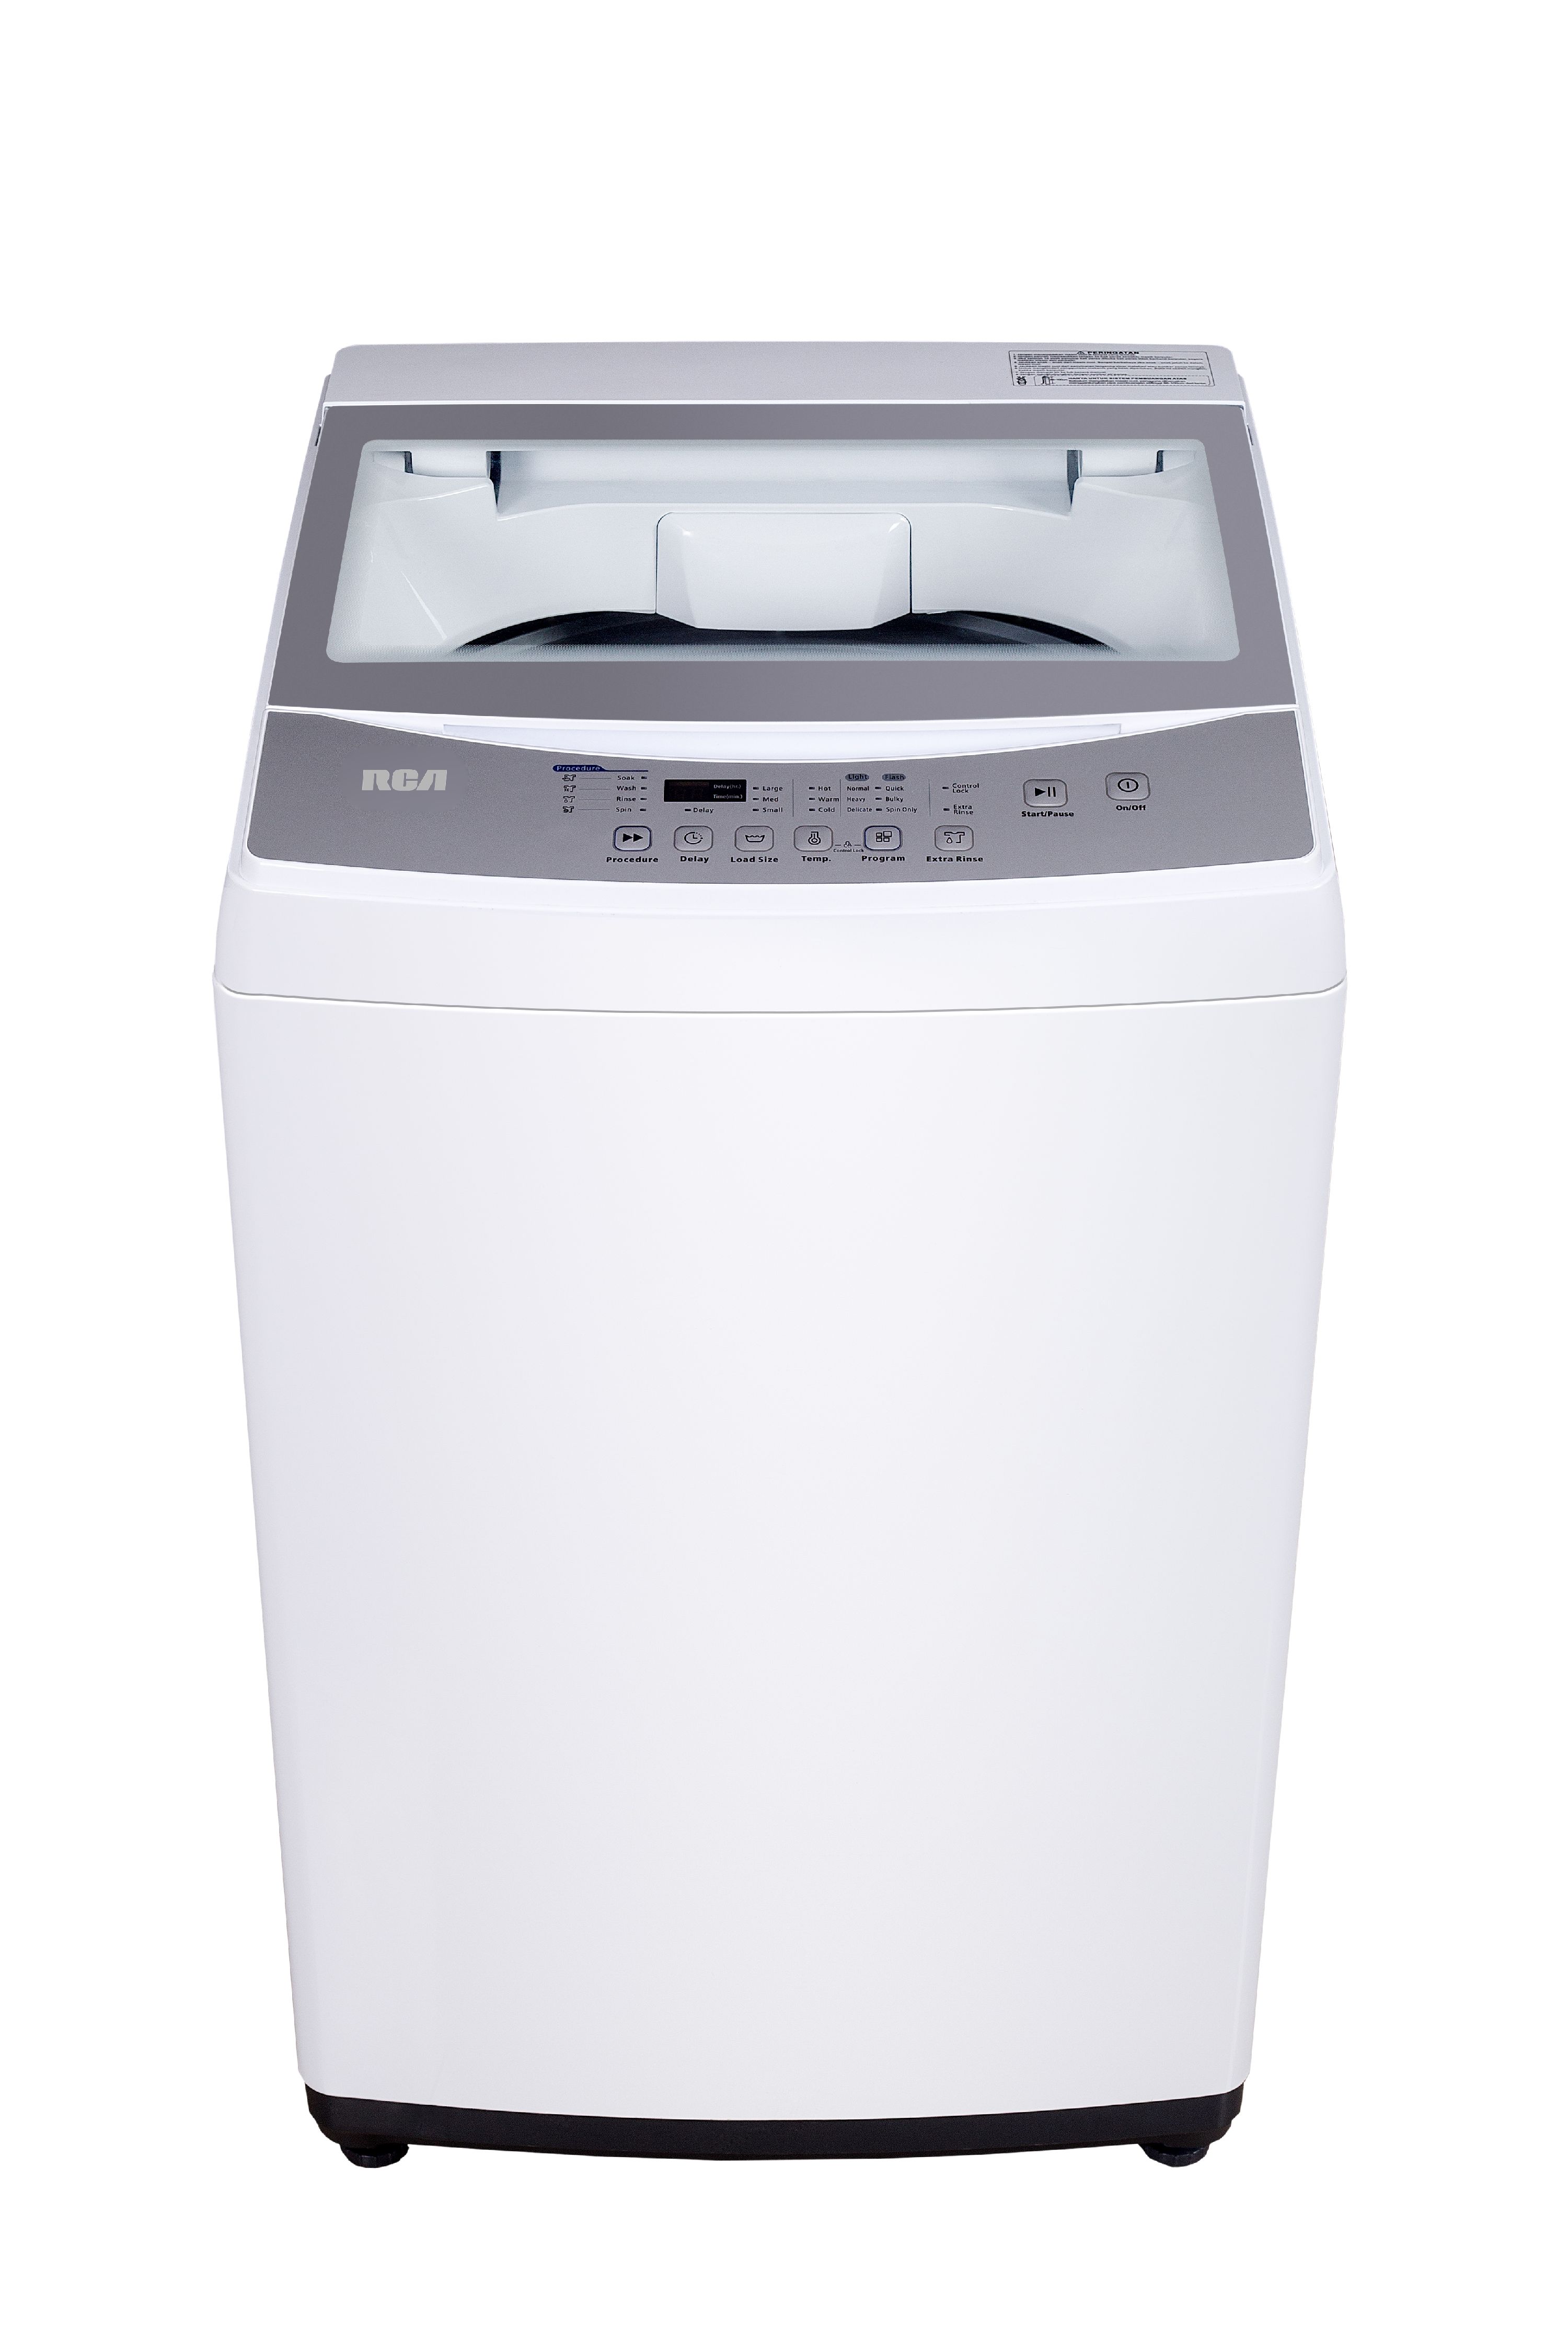 RCA 2.0 Cu. Ft. Portable Washer RPW210, White - image 3 of 8